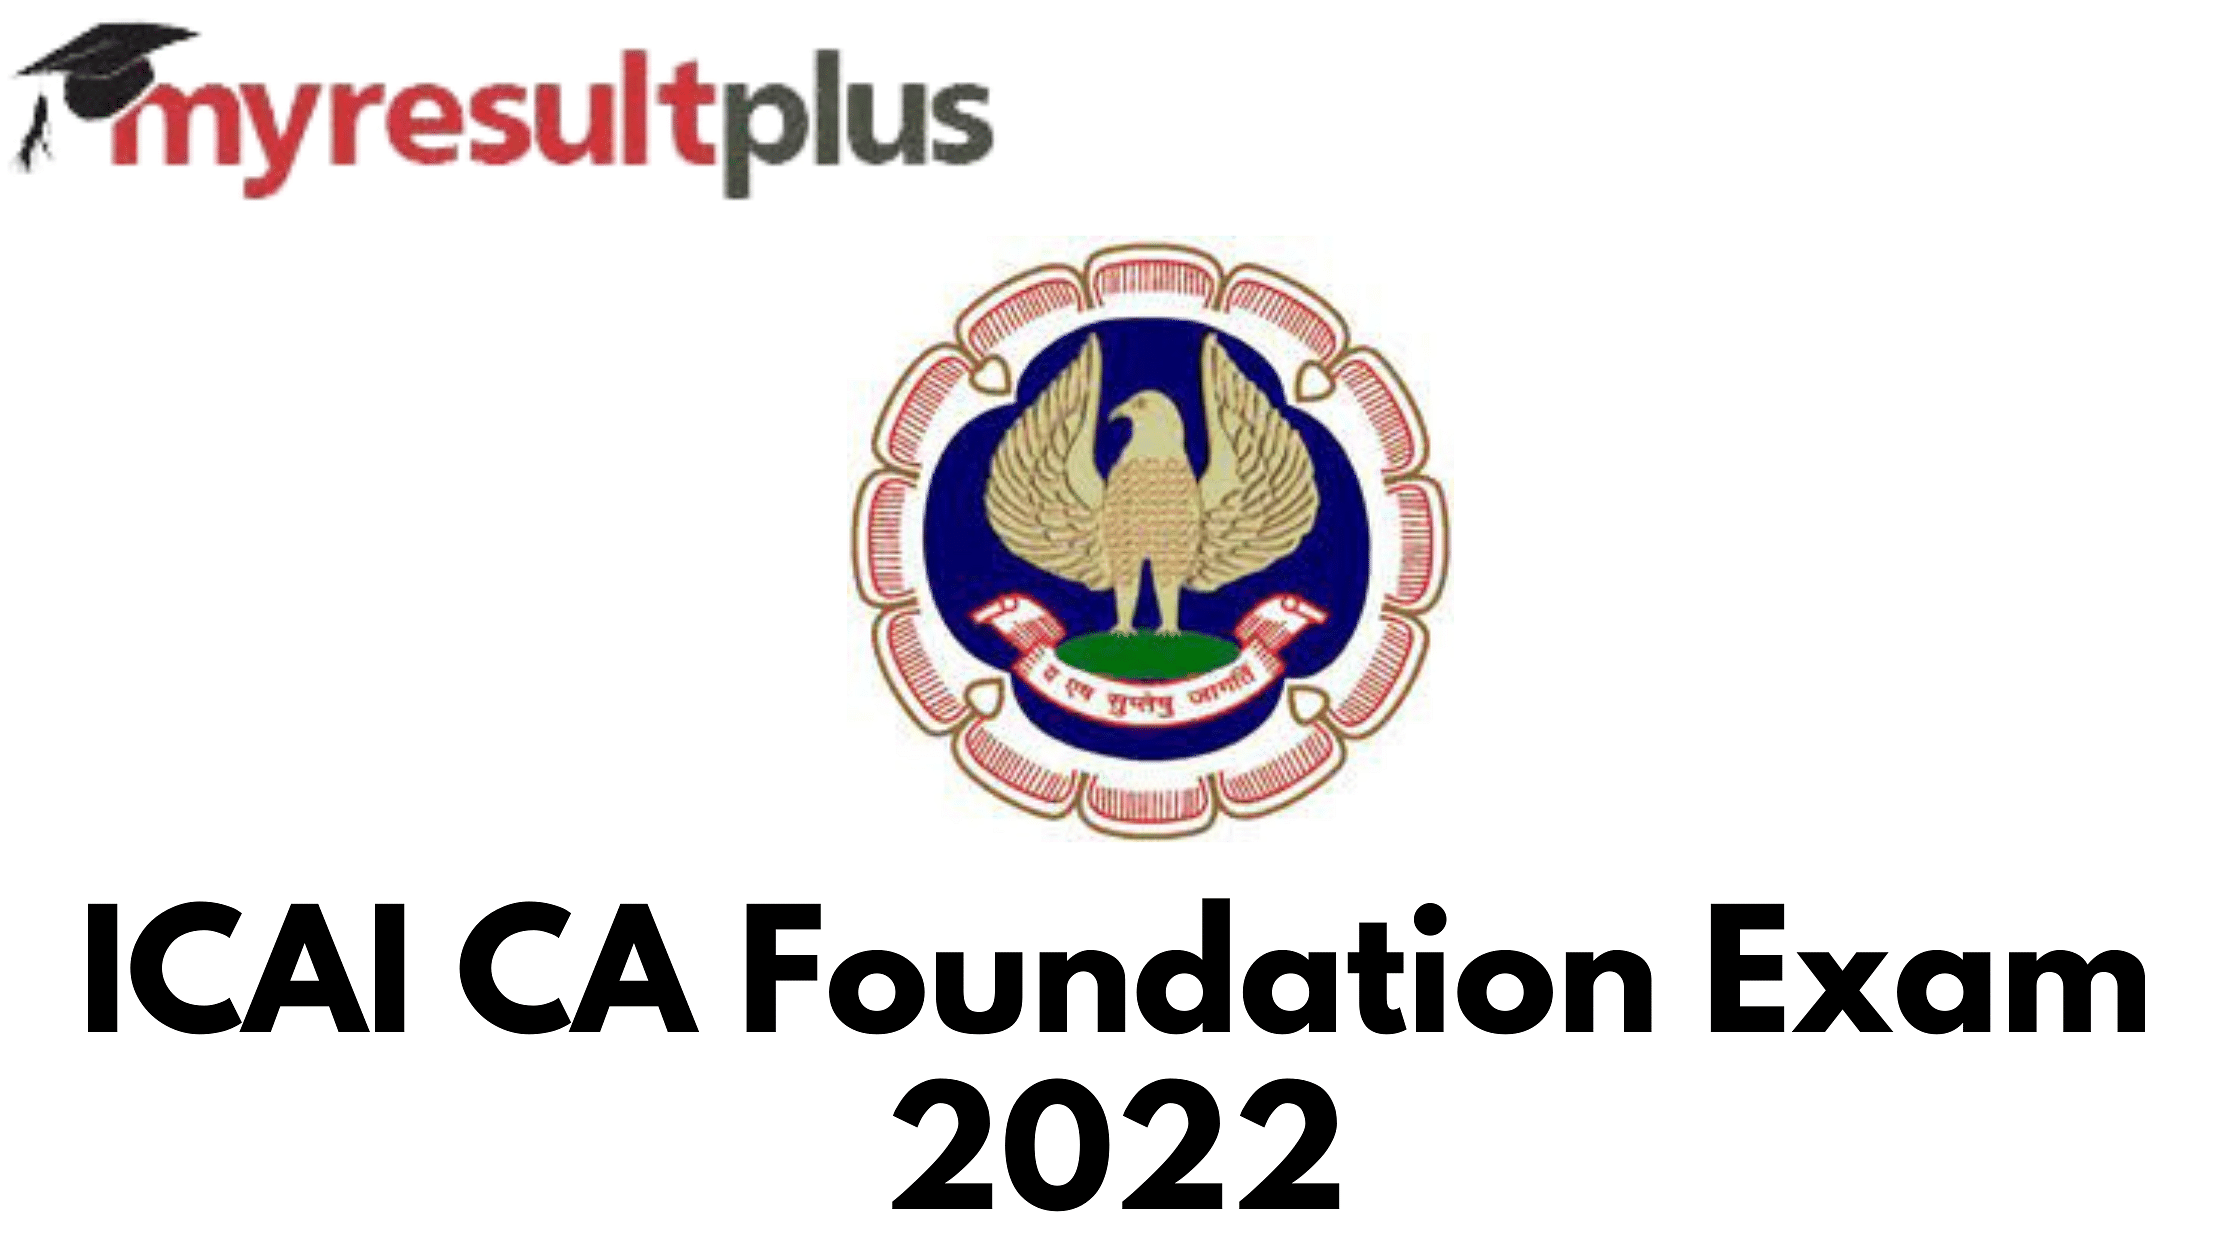 ICAI CA Foundation December 2022: Registration Window Closes Today, Here's How to Apply